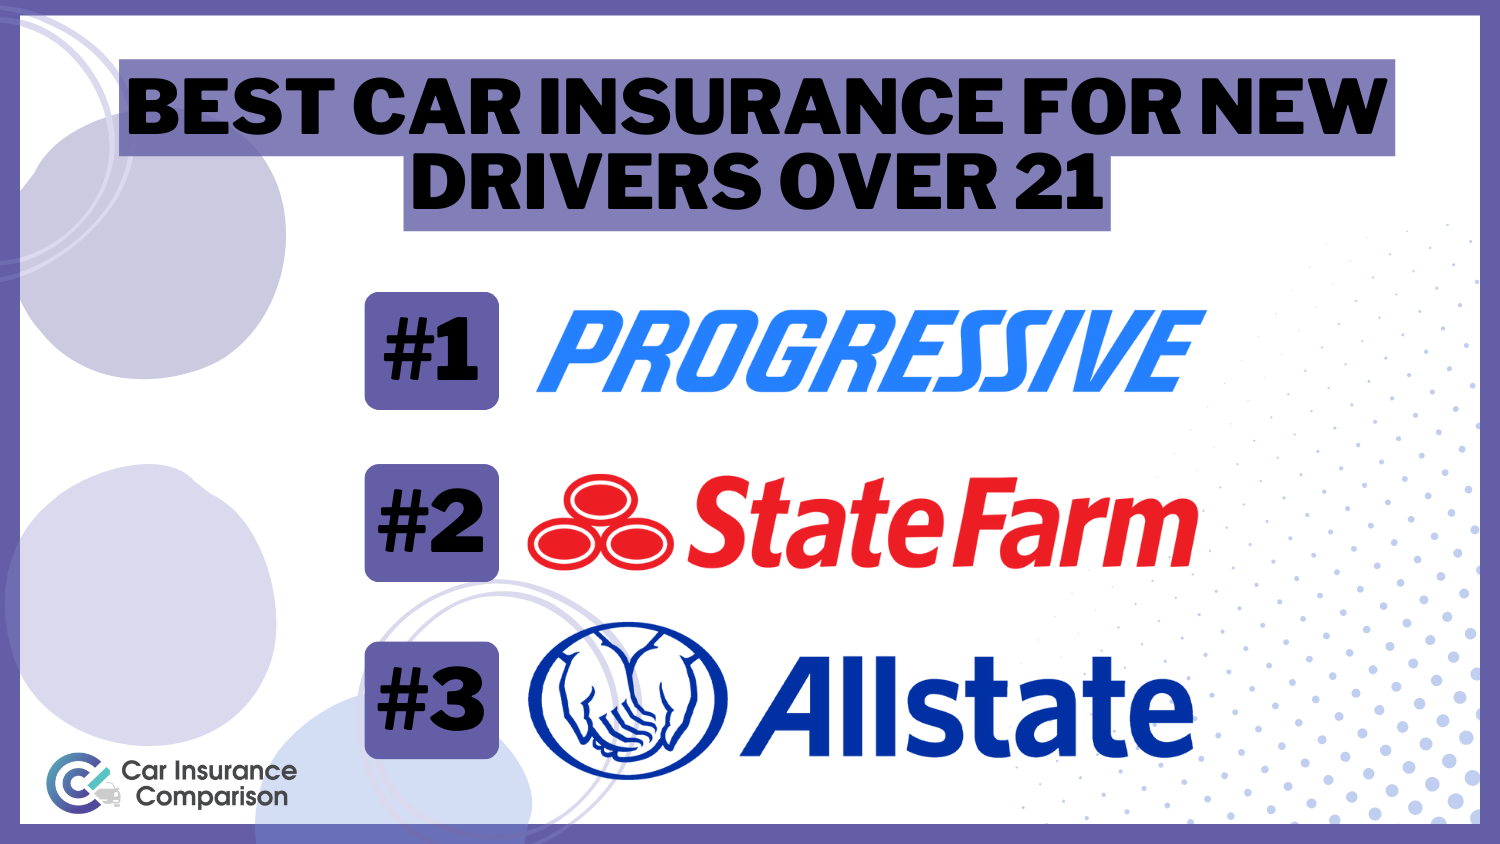 Progressive, State Farm and Allstate: Best Car Insurance for New Drivers Over 21